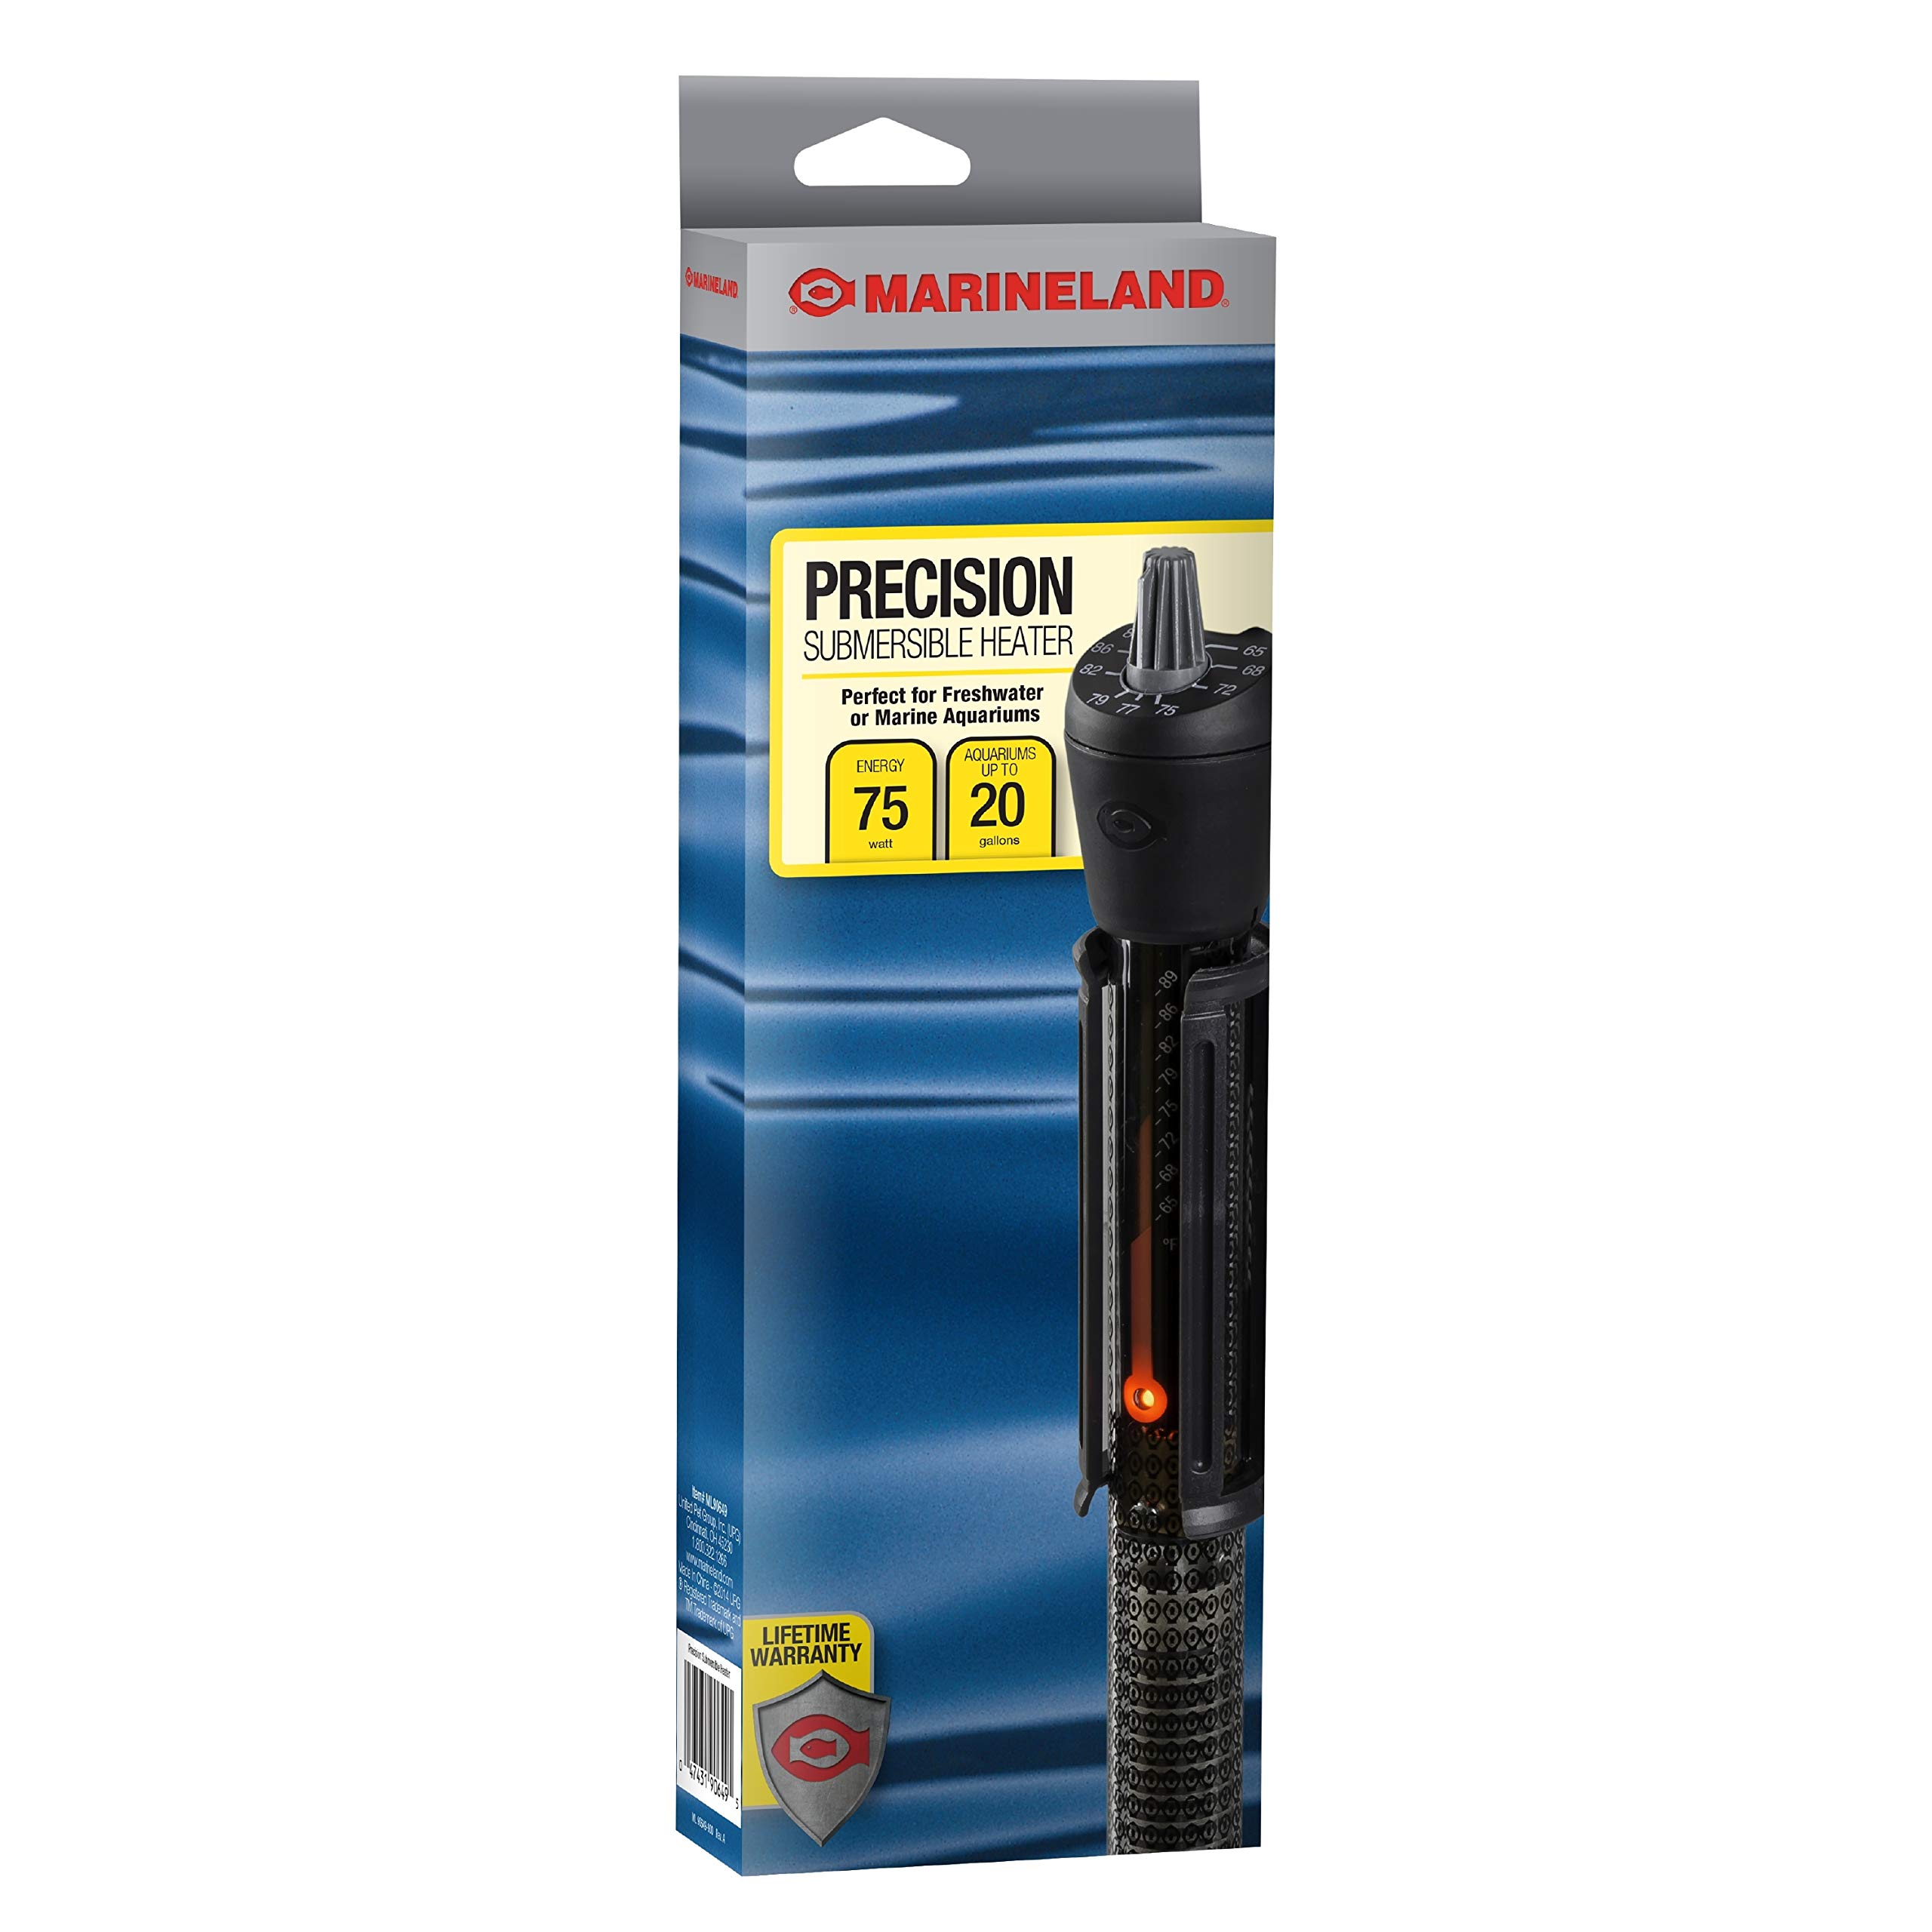 Marineland Precision Heater: Ideal for Saltwater or Freshwater Aquariums.